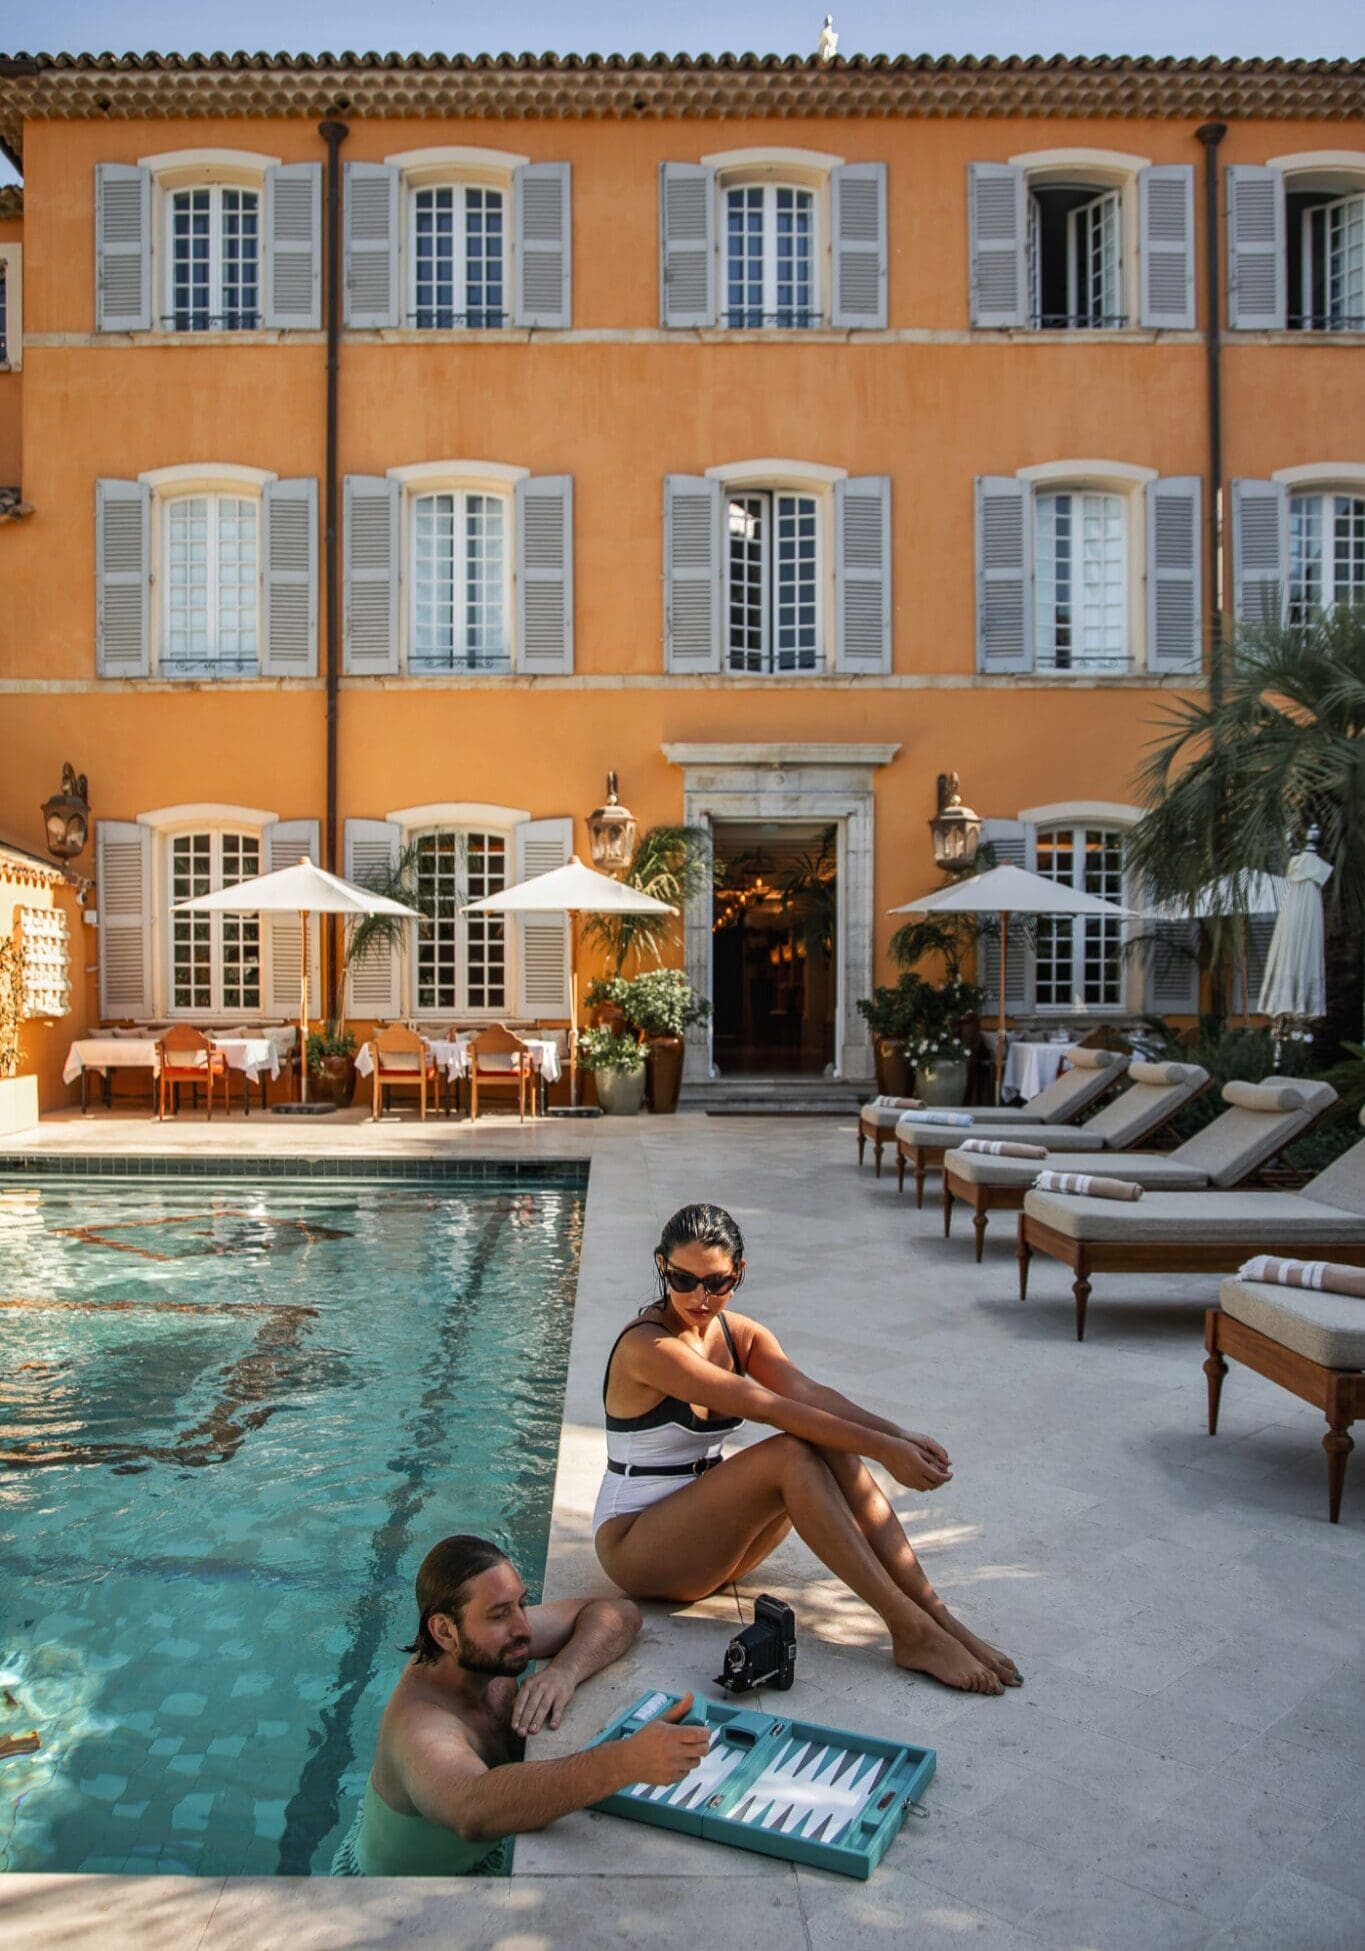 Anoushka and Adam playing a game of backgammon by the pool at Airelles Saint Tropez